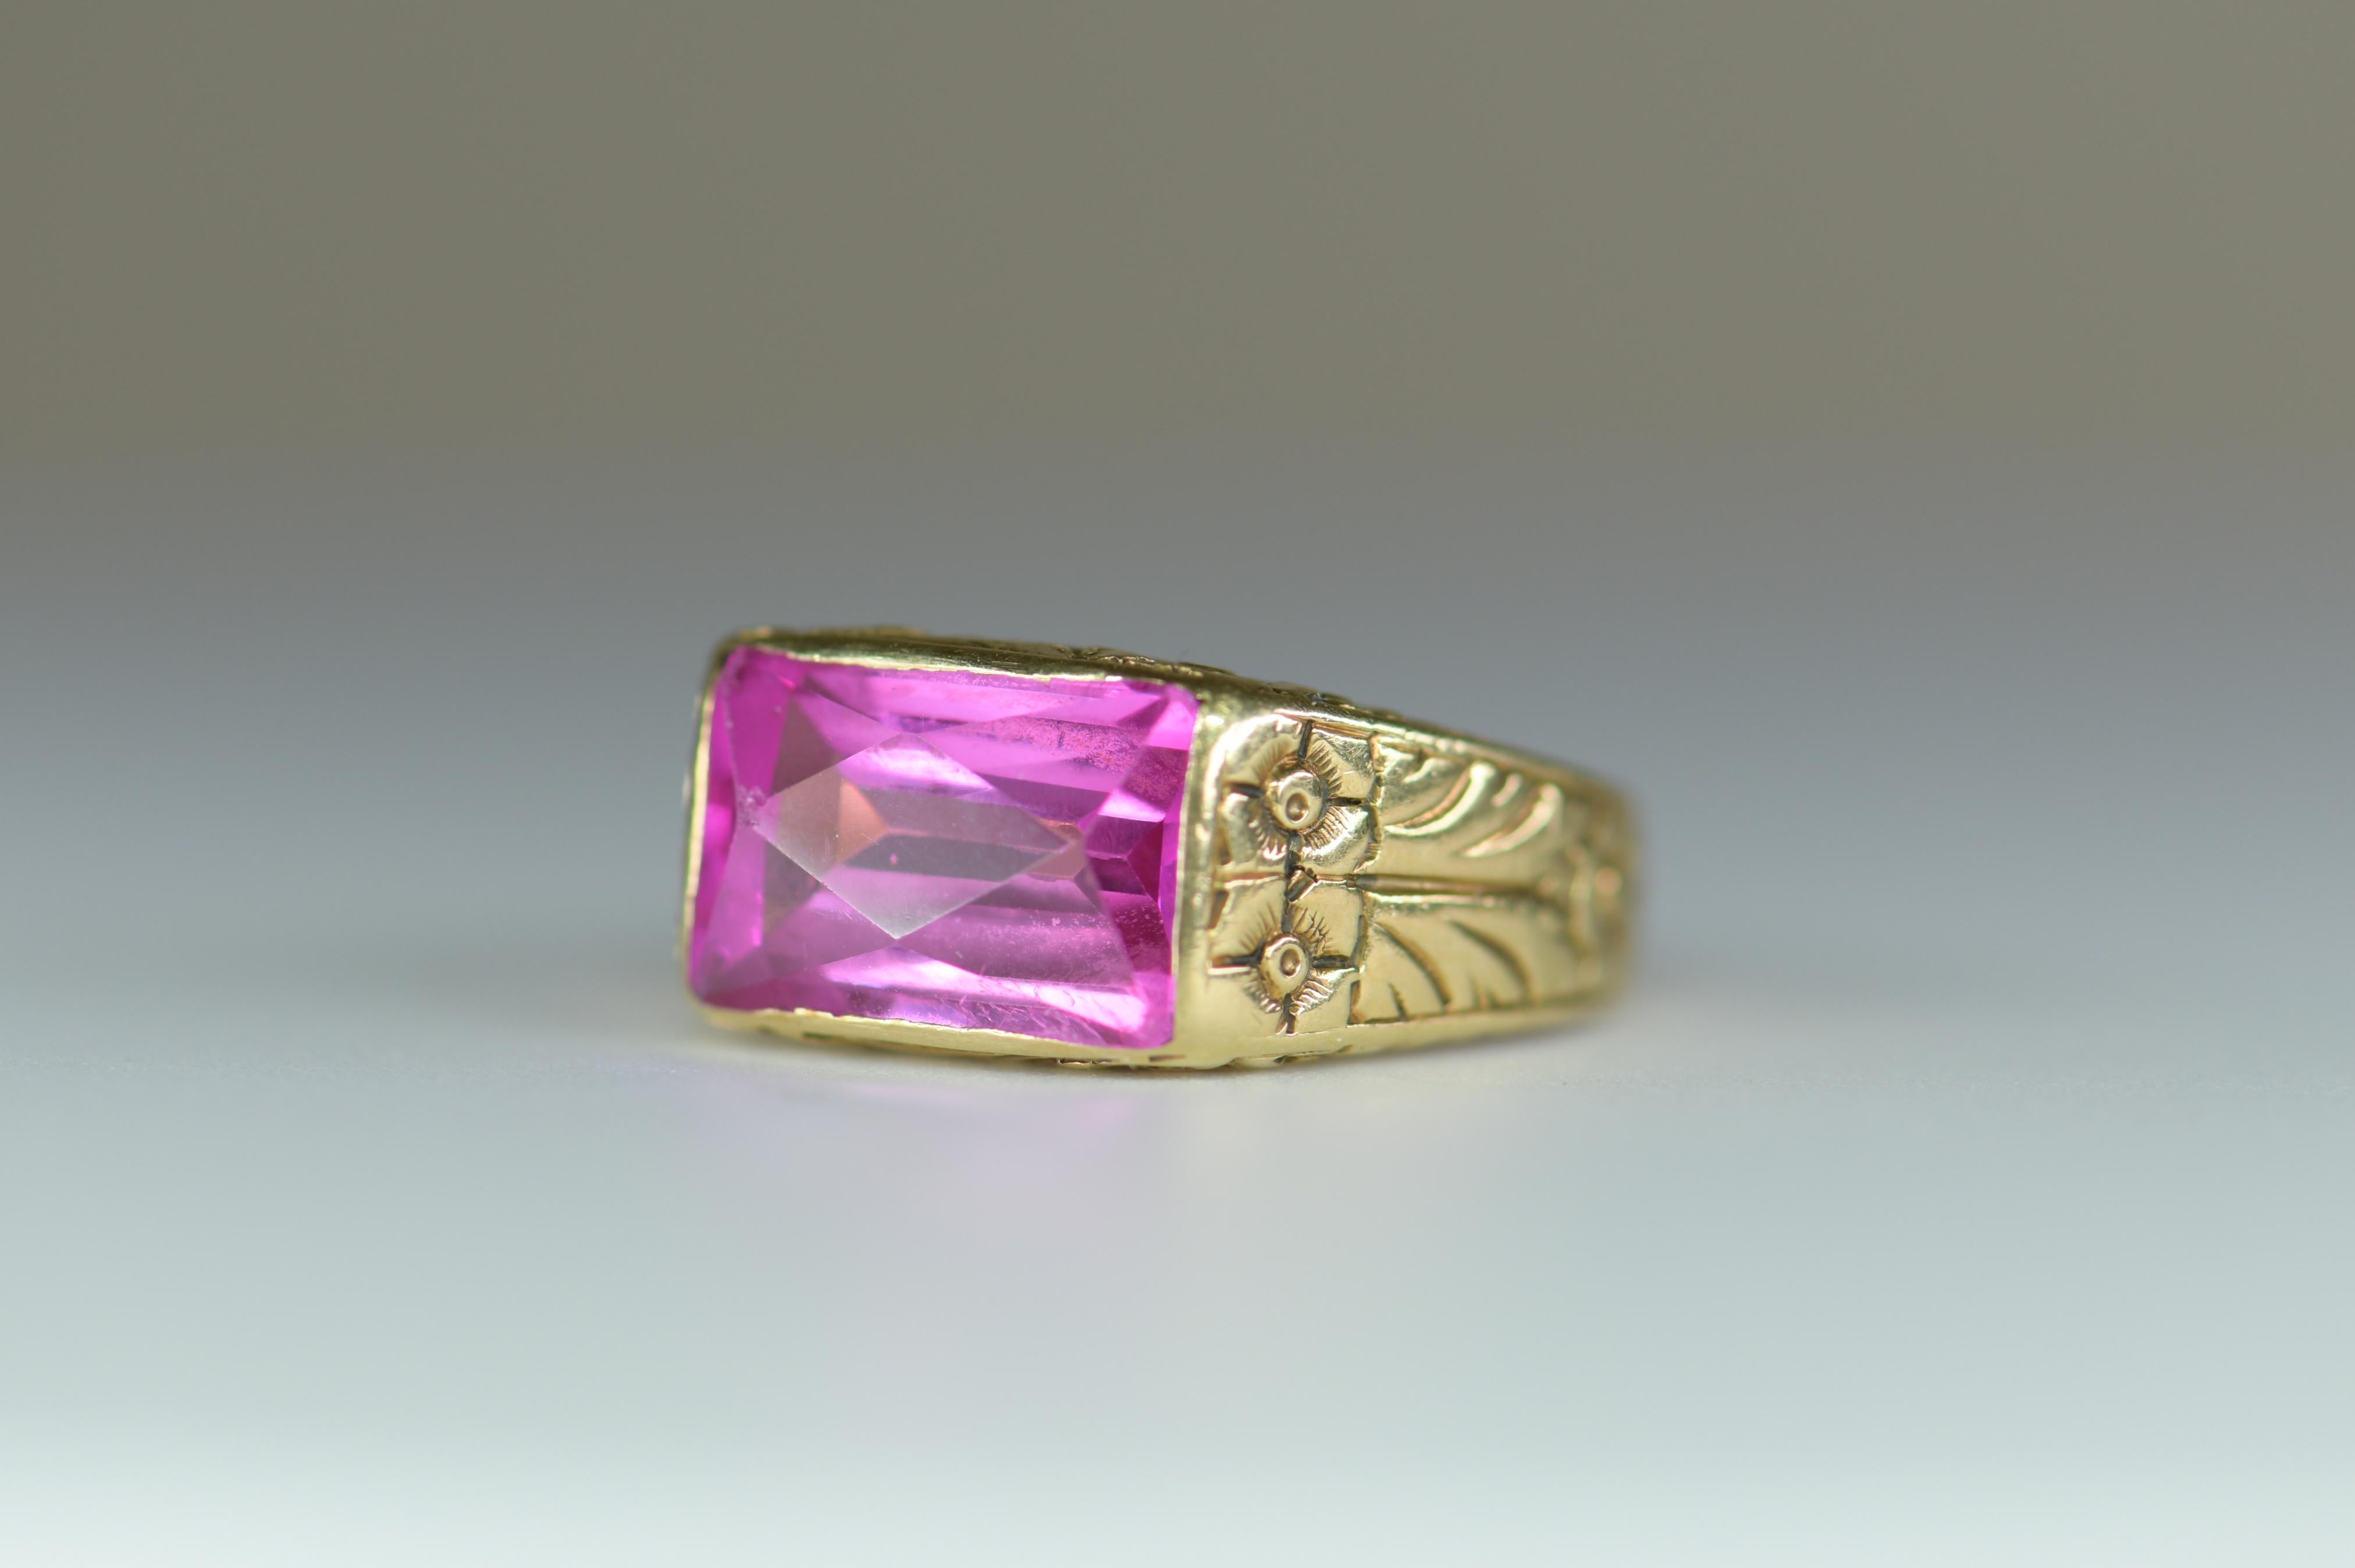 Antique engraved floral design ring features a vibrant 12mm x 7mm pink quartz. A bright electric teal pink emerald-cut pink quartz is beautifully presented in engraved gold.  The yellow gold band features a scrolling floral design engraved around